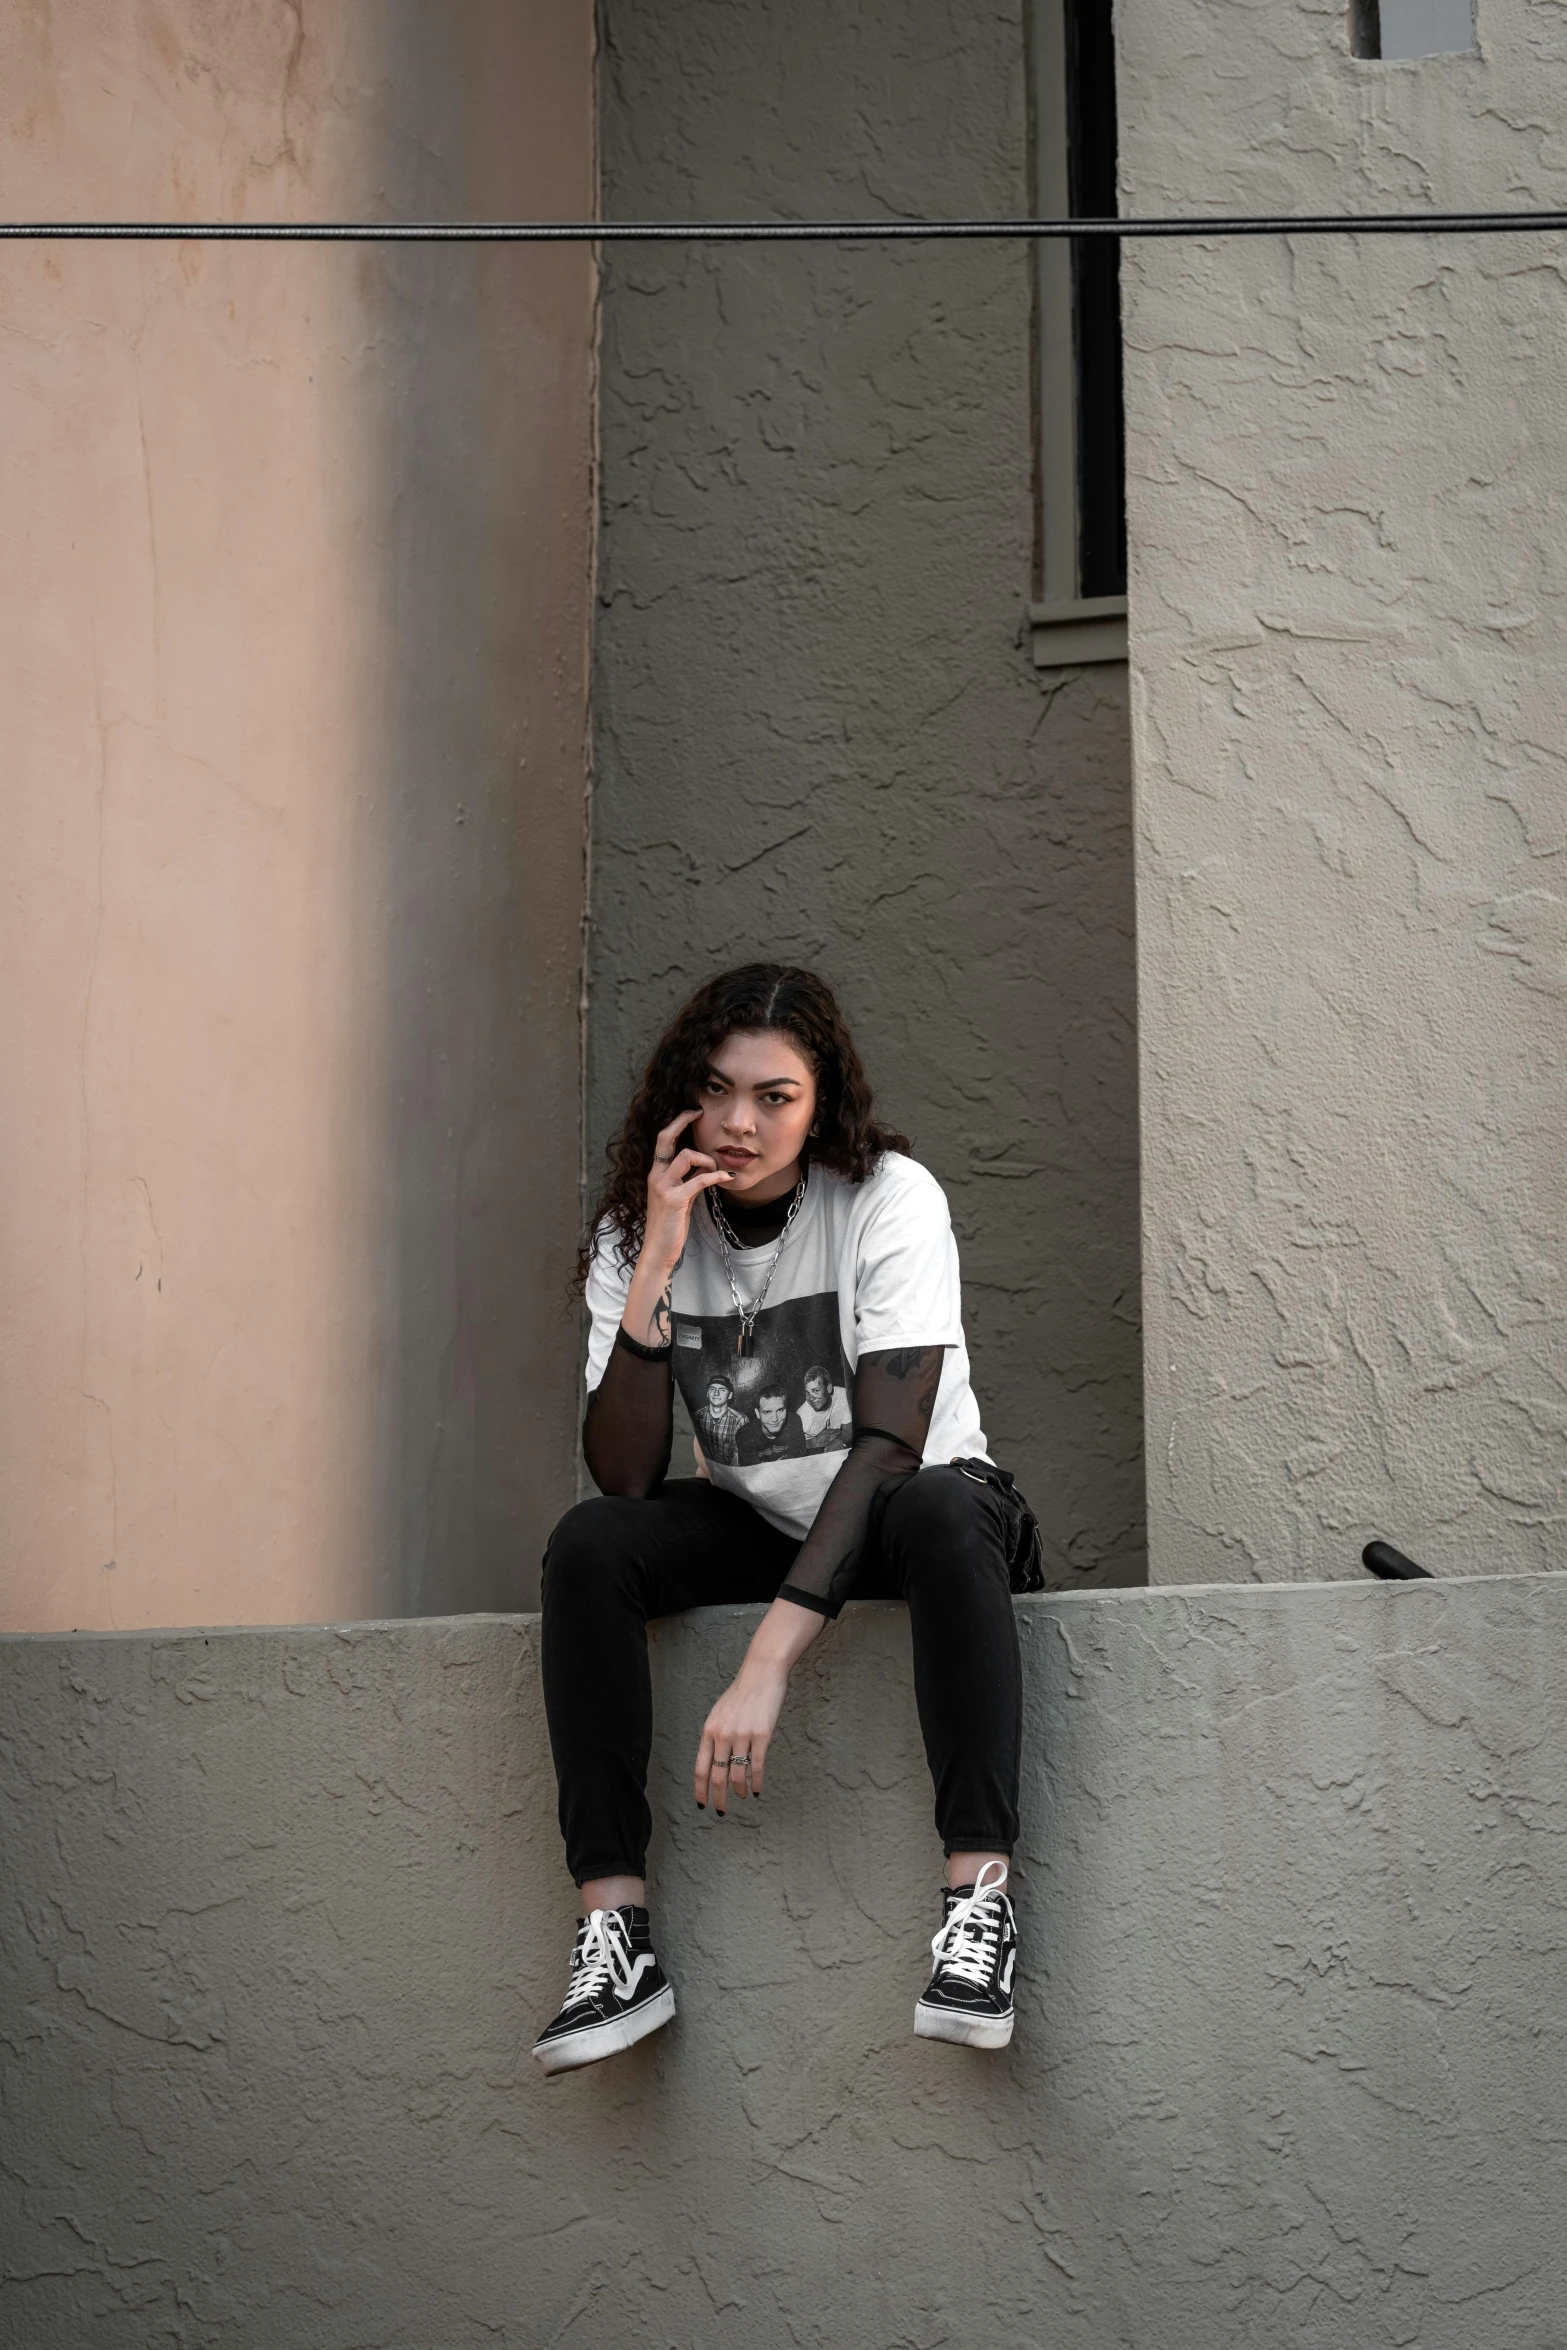 a woman in a white shirt and black jeans sitting on stairs talking on her cell phone